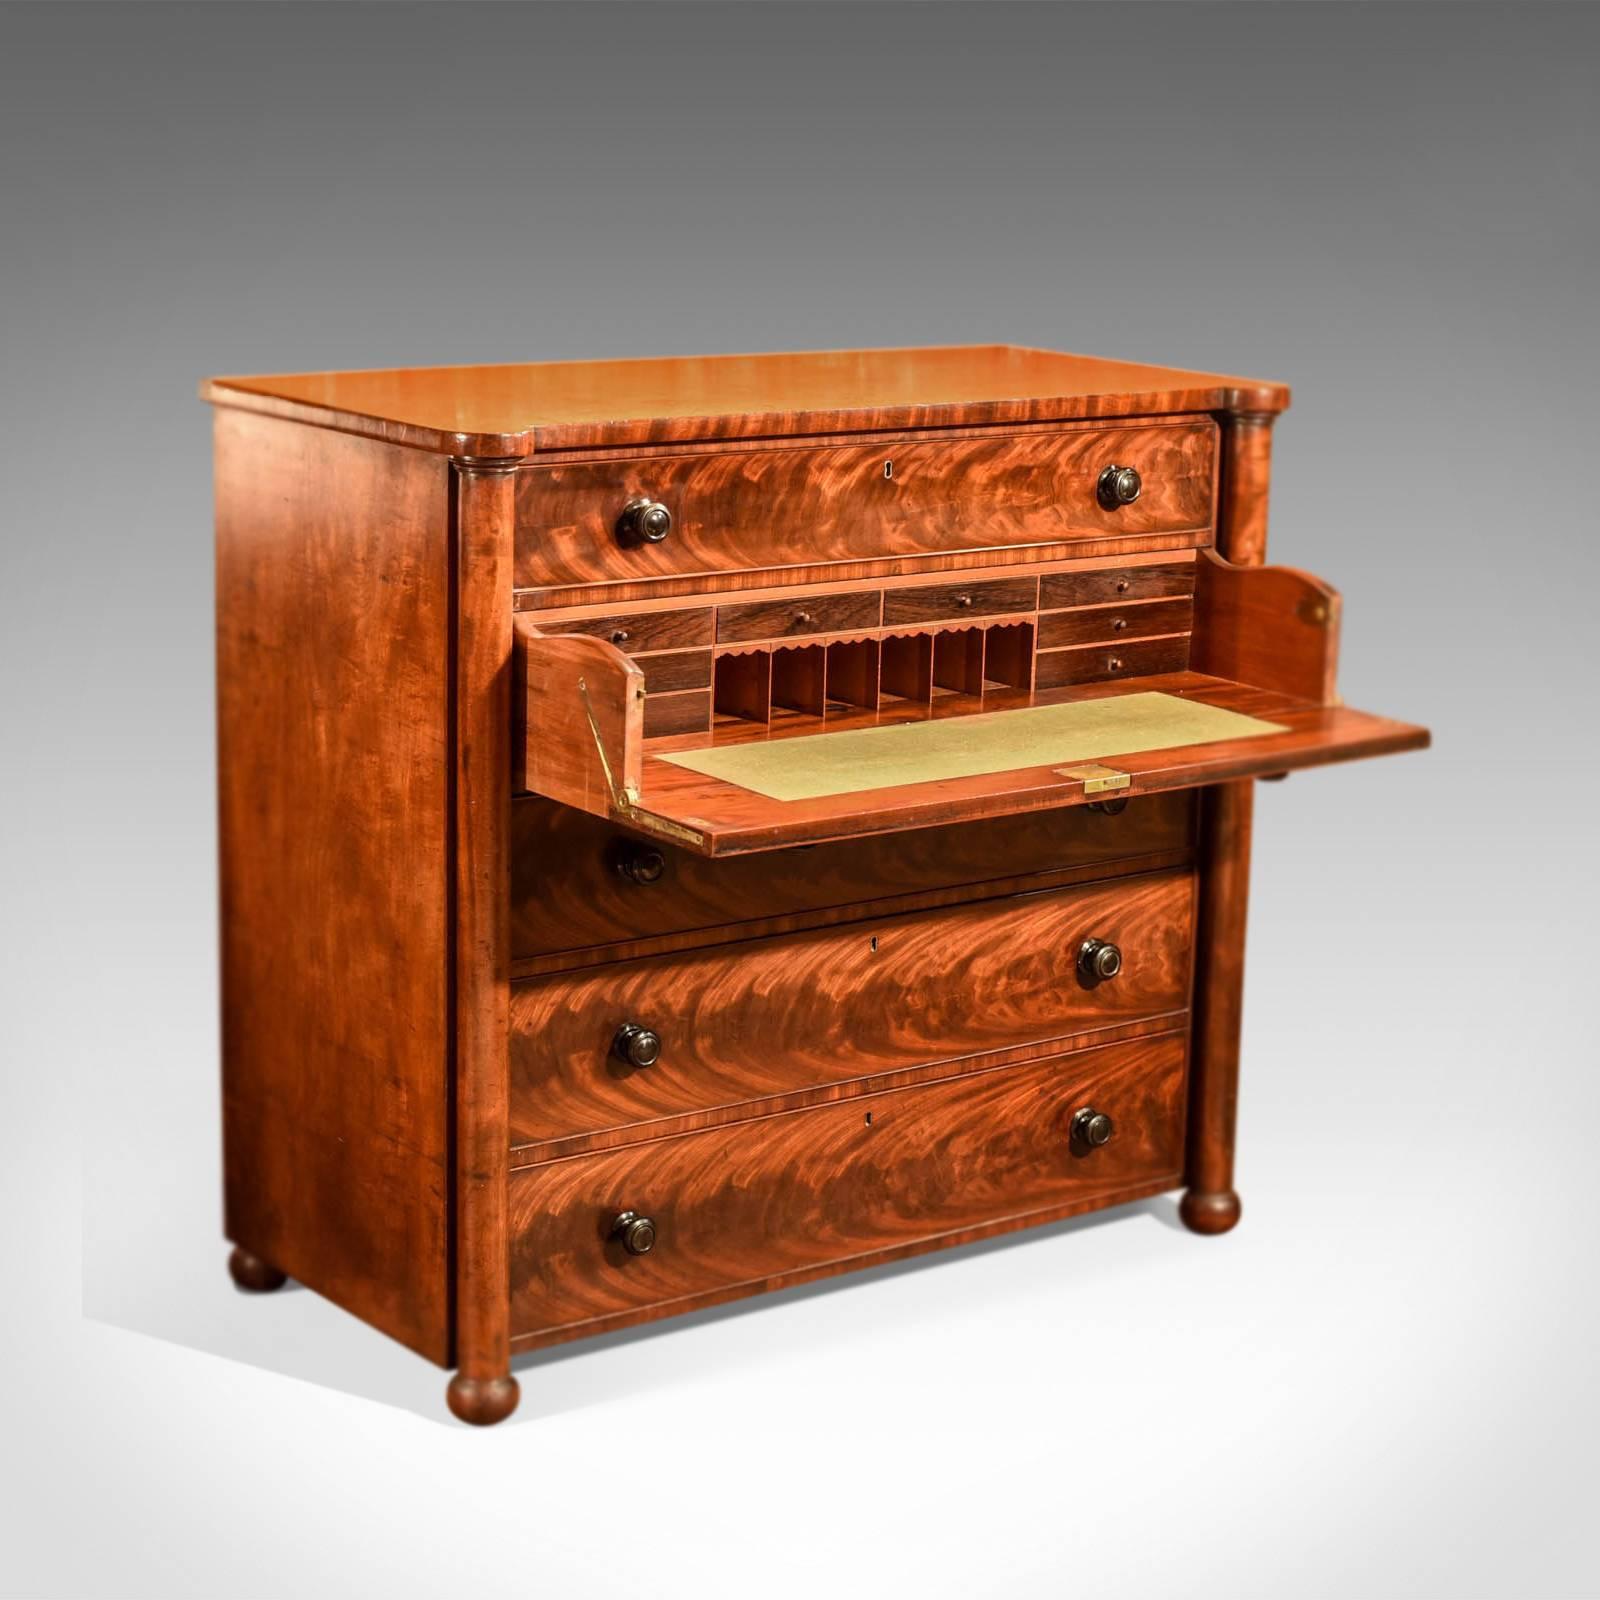 This is an antique secretaire chest of drawers dating to the Victorian era, circa 1850.

Displaying the most wonderful grain detail in flame mahogany, the drawers are finished with exceptional cock beading, dressed with ebony pulls, fitted with